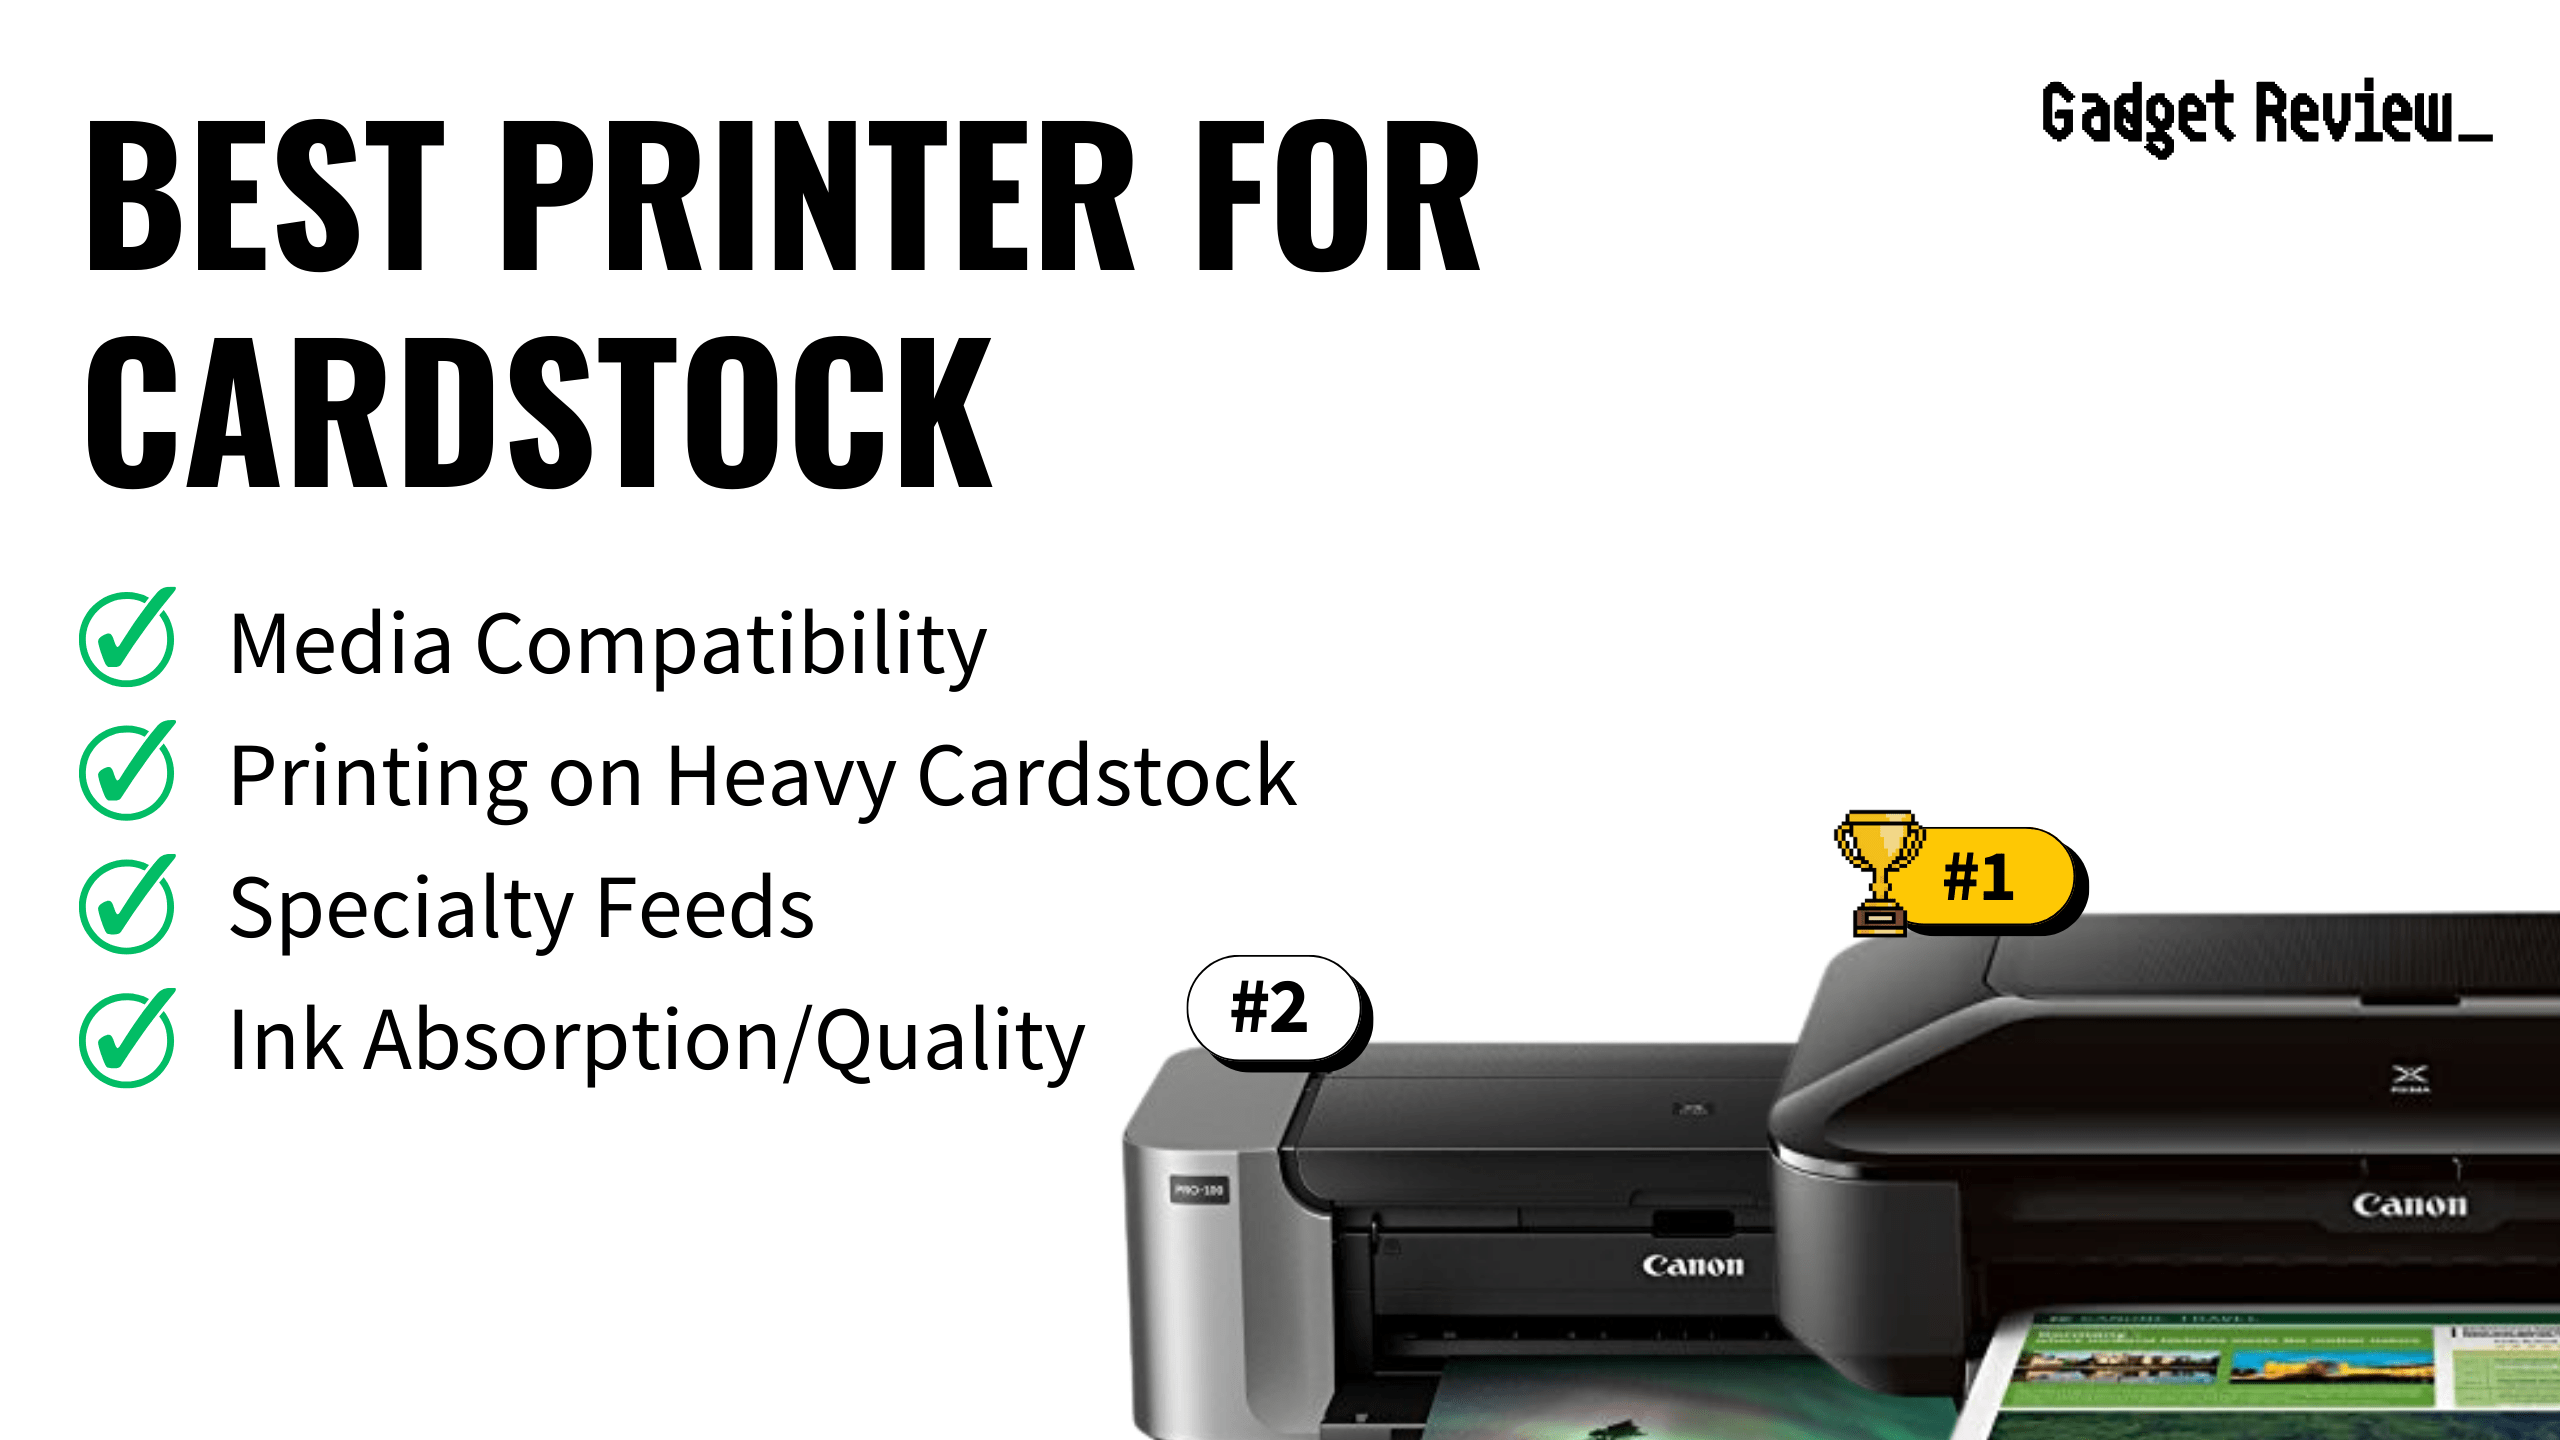 best printer cardstock featured image that shows the top three best printer models